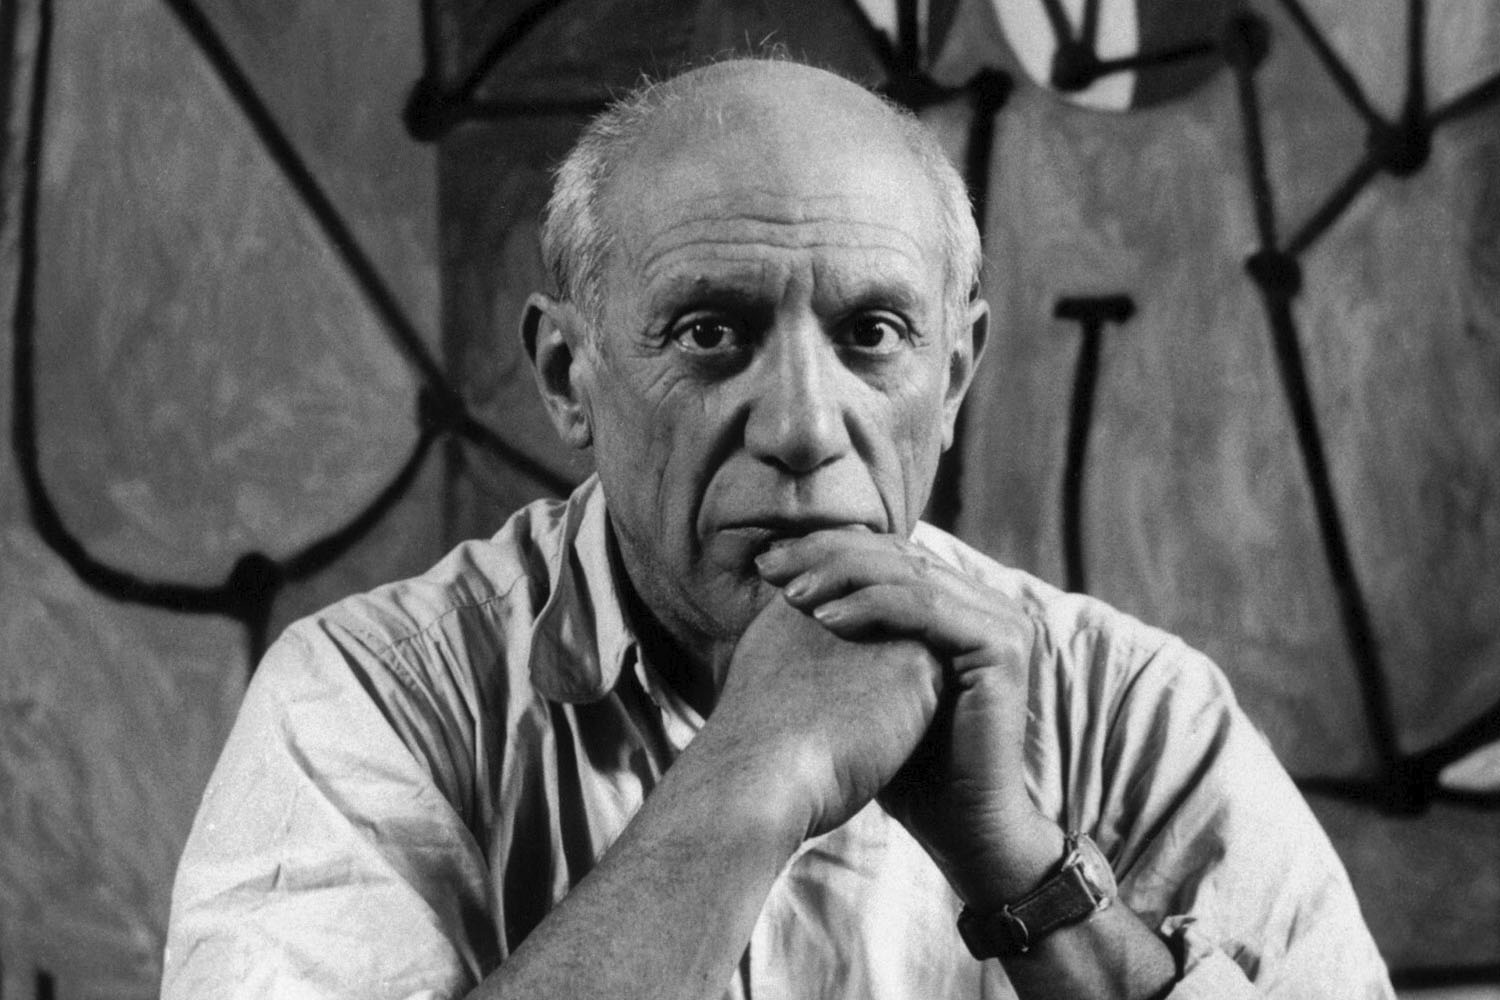 Photographic exhibition "Picasso by the great masters"